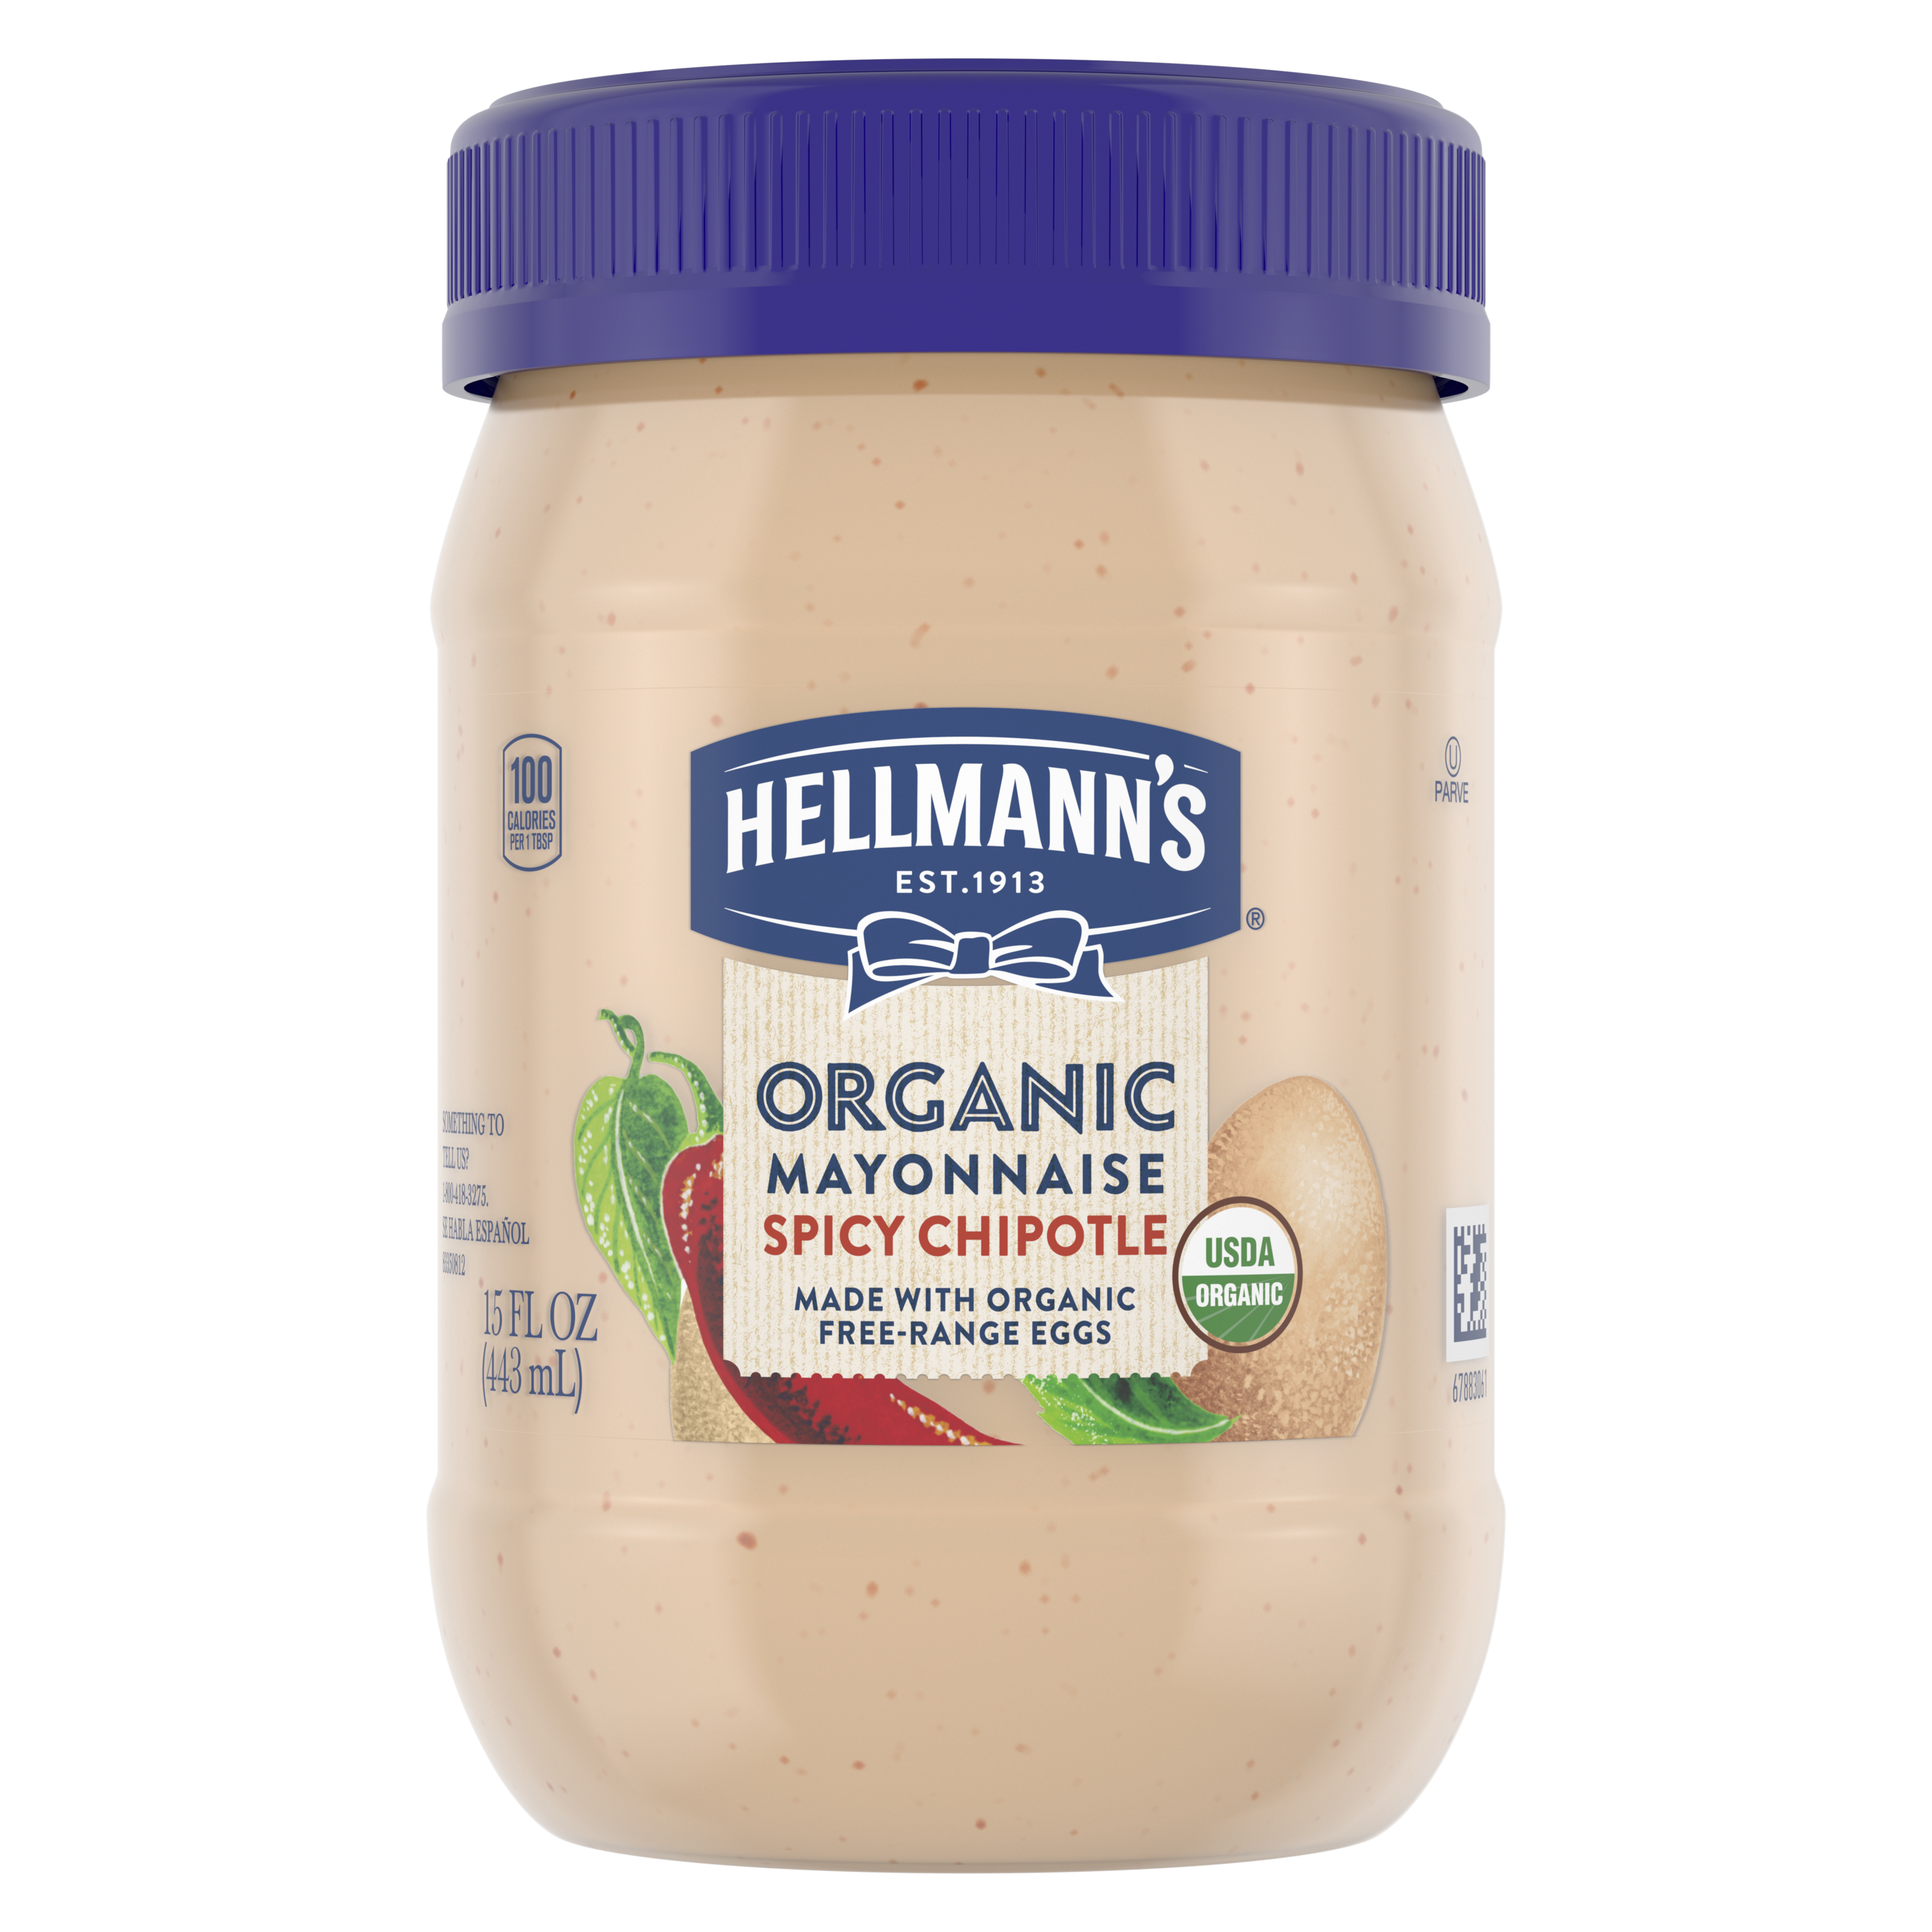 Organic Spicy Chipotle Mayonnaise